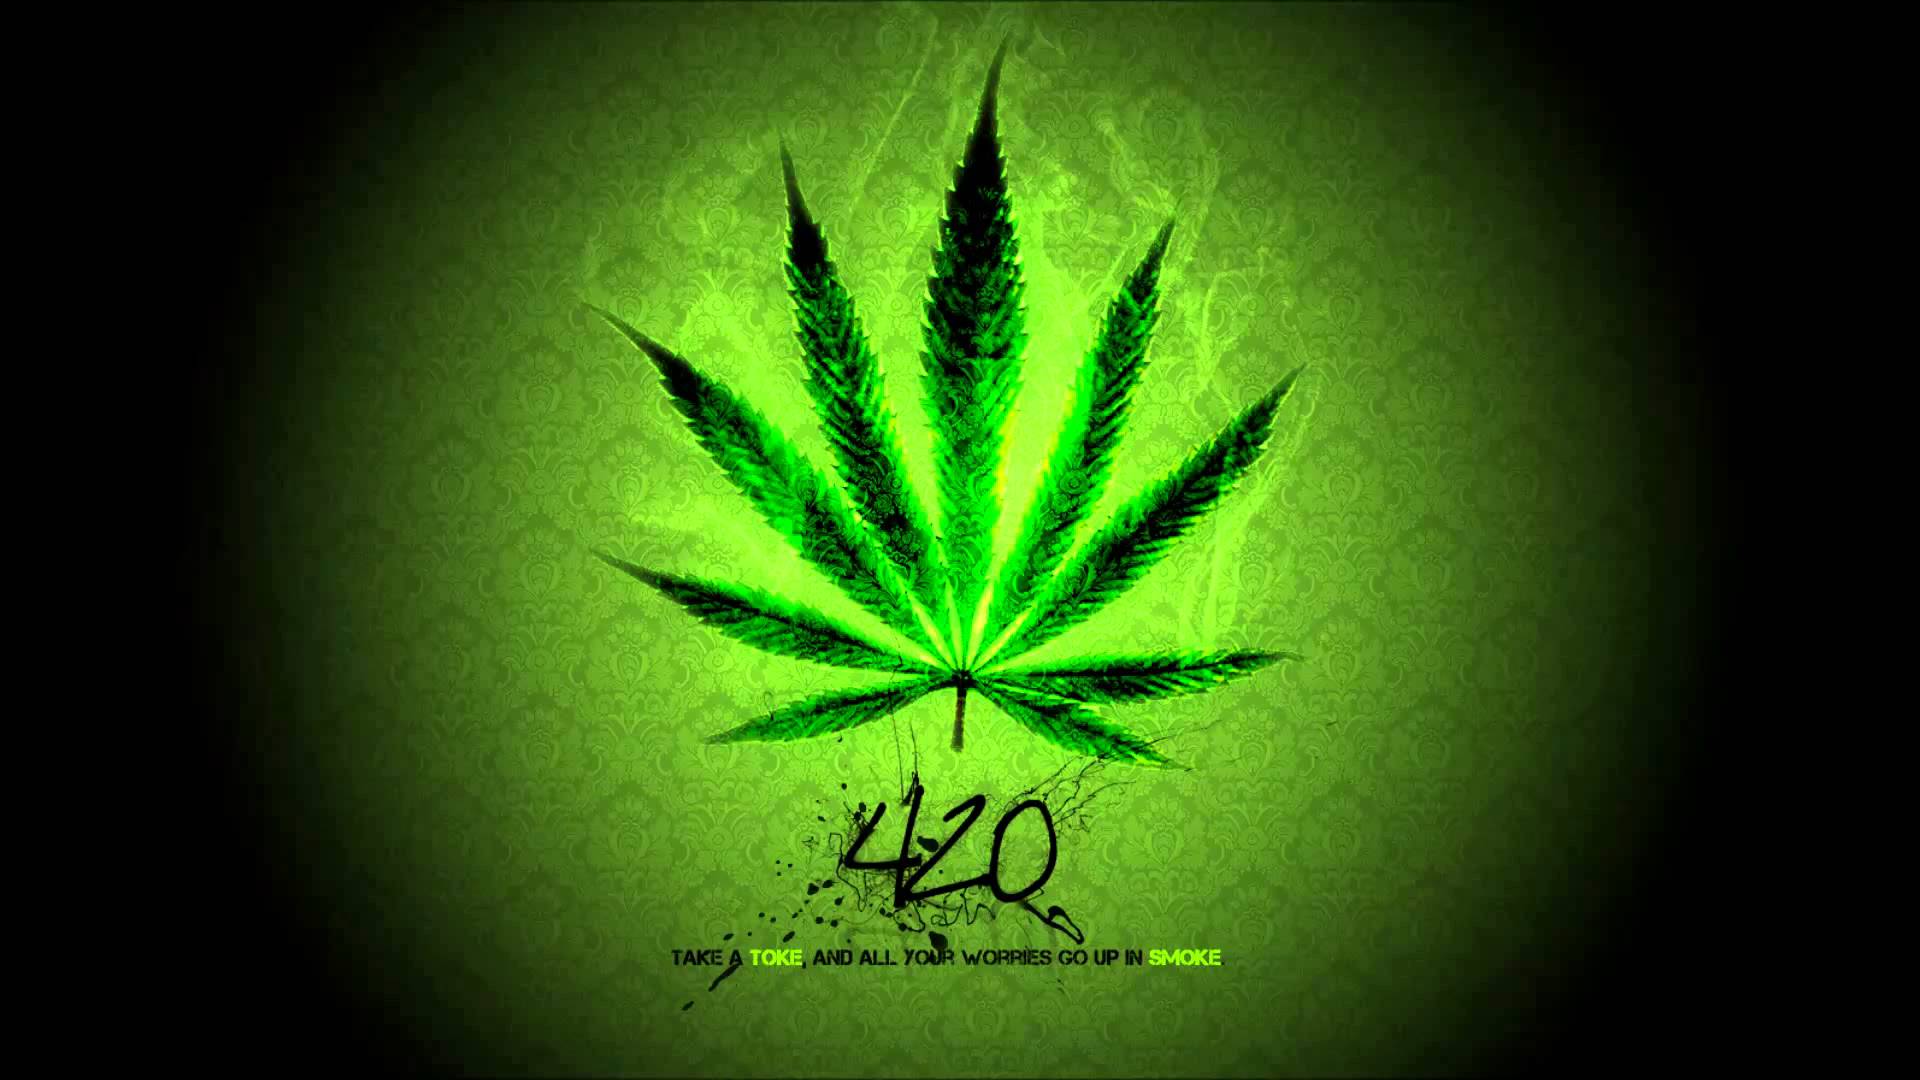 🔥 Free download Weed Wallpaper Hd 1080p Maxresdefaultjpg Pictures